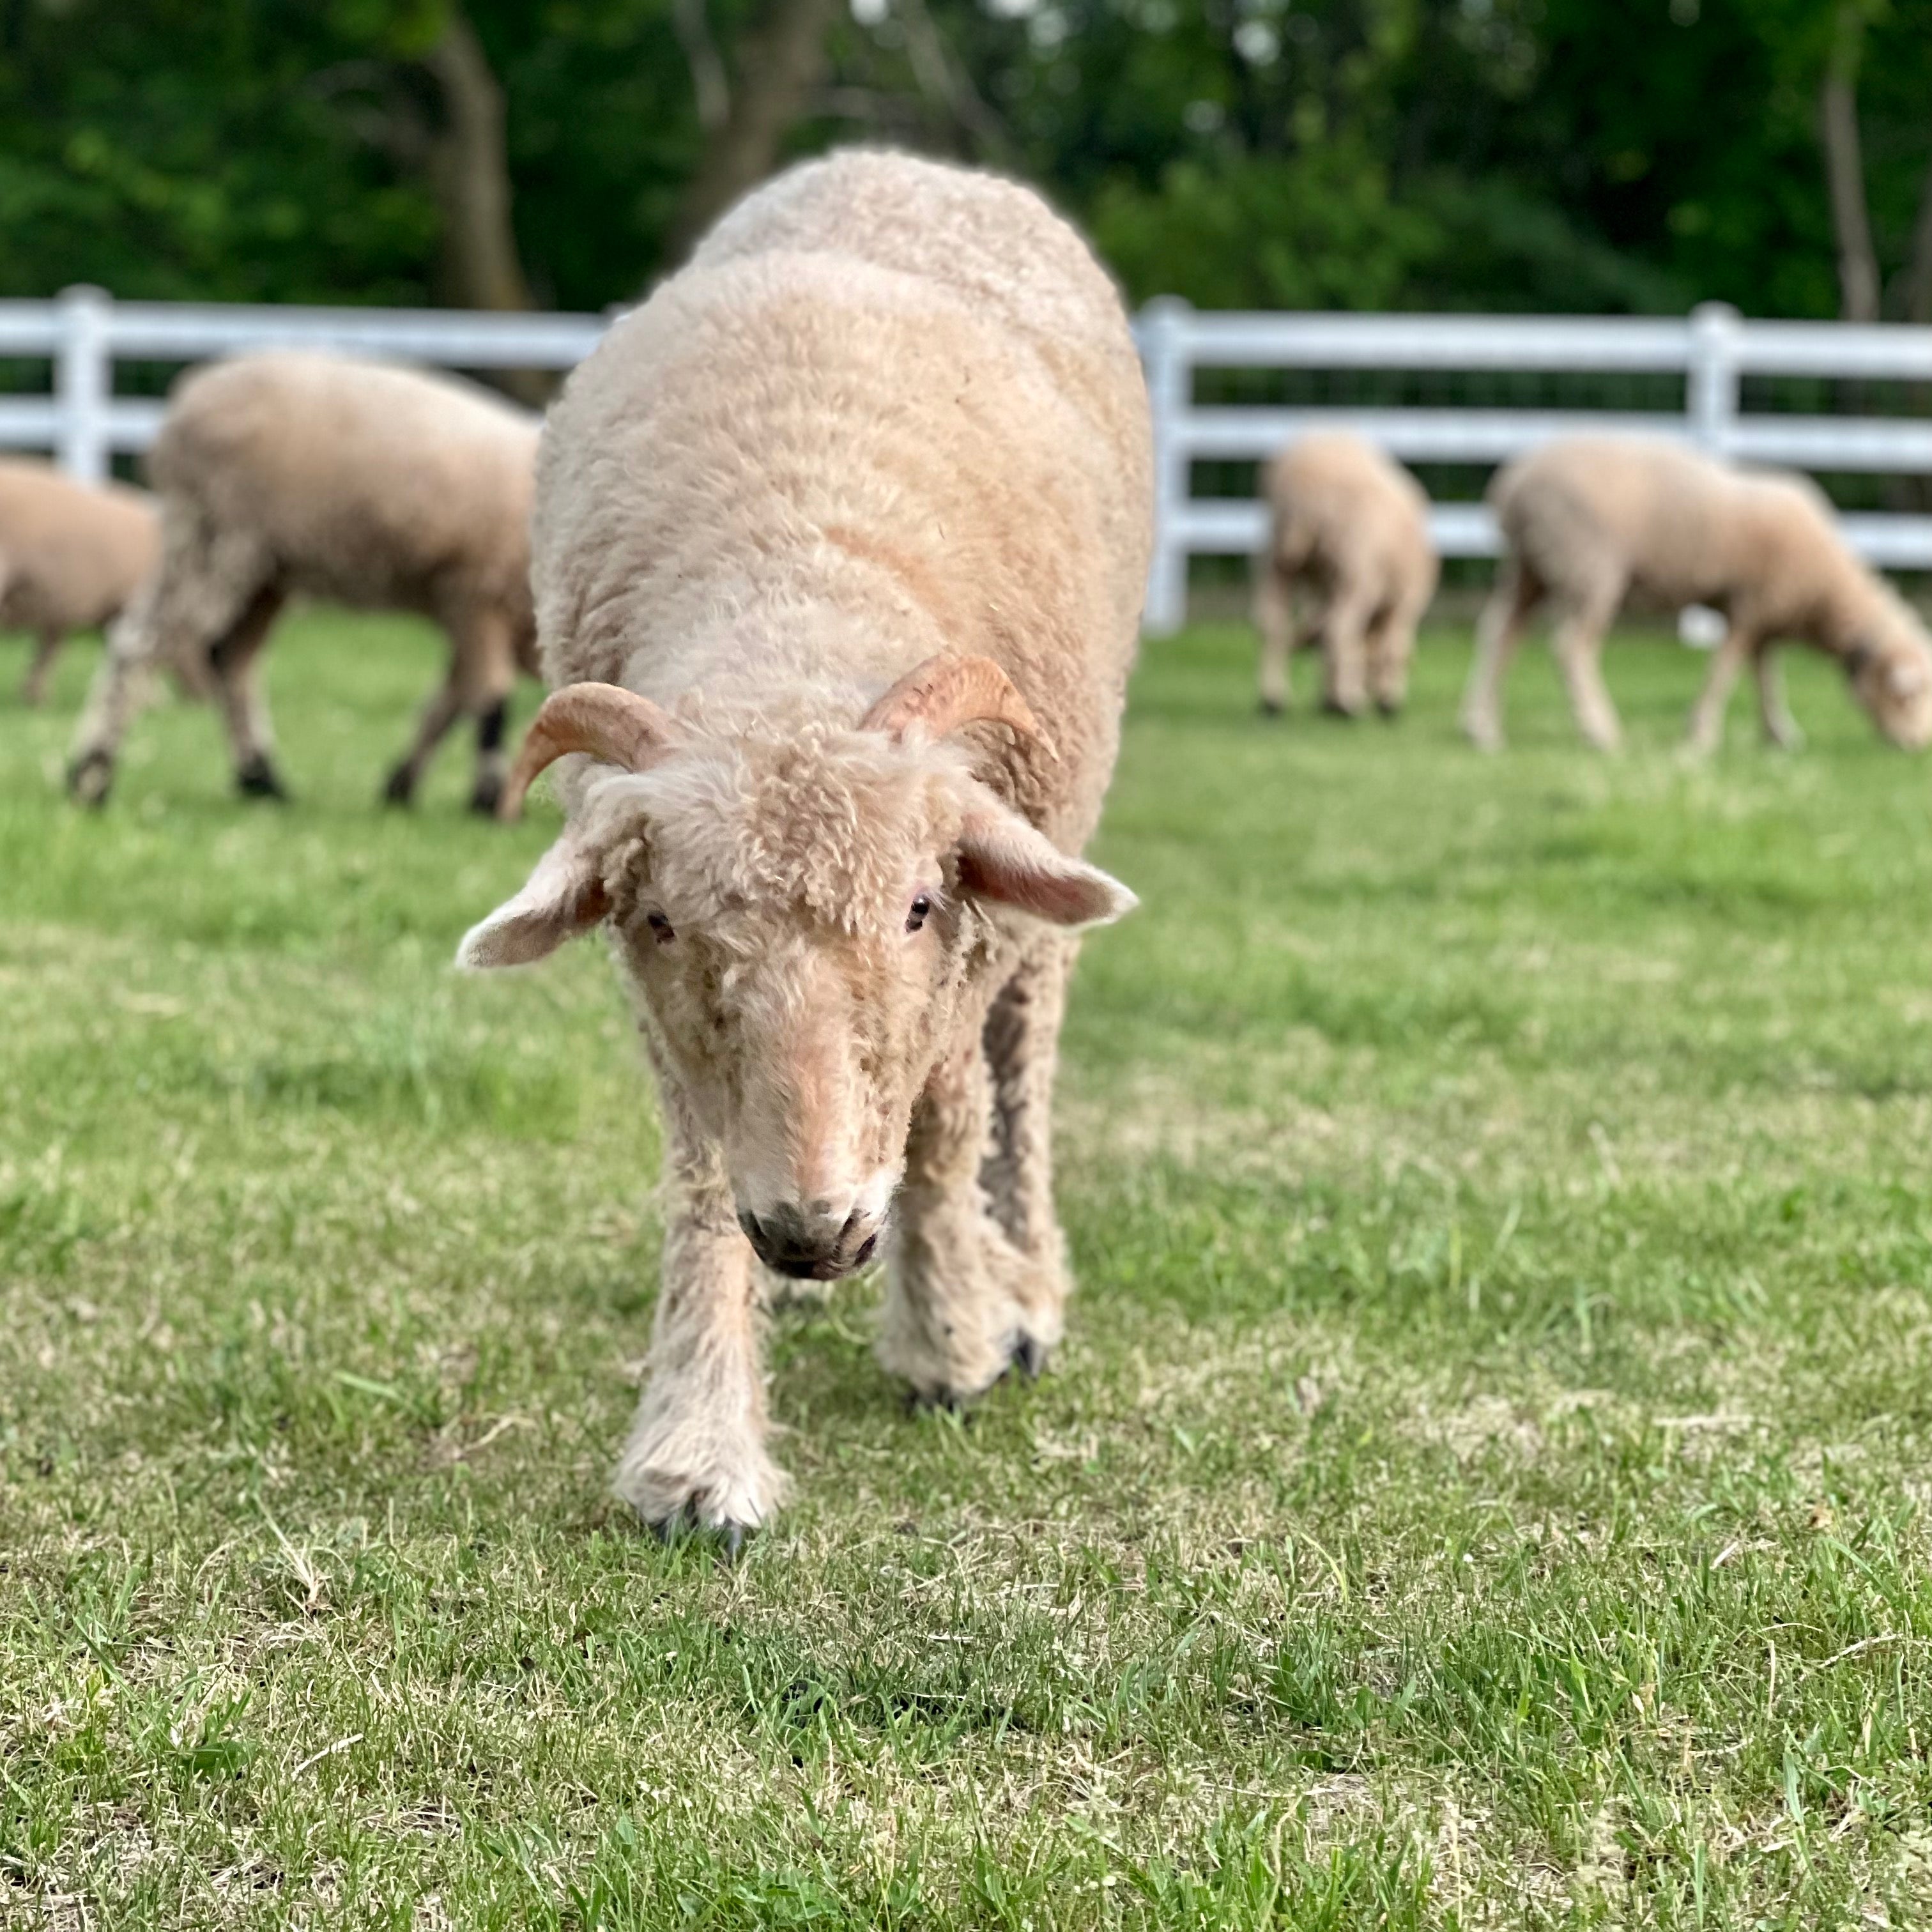 A sheep grazing in the field